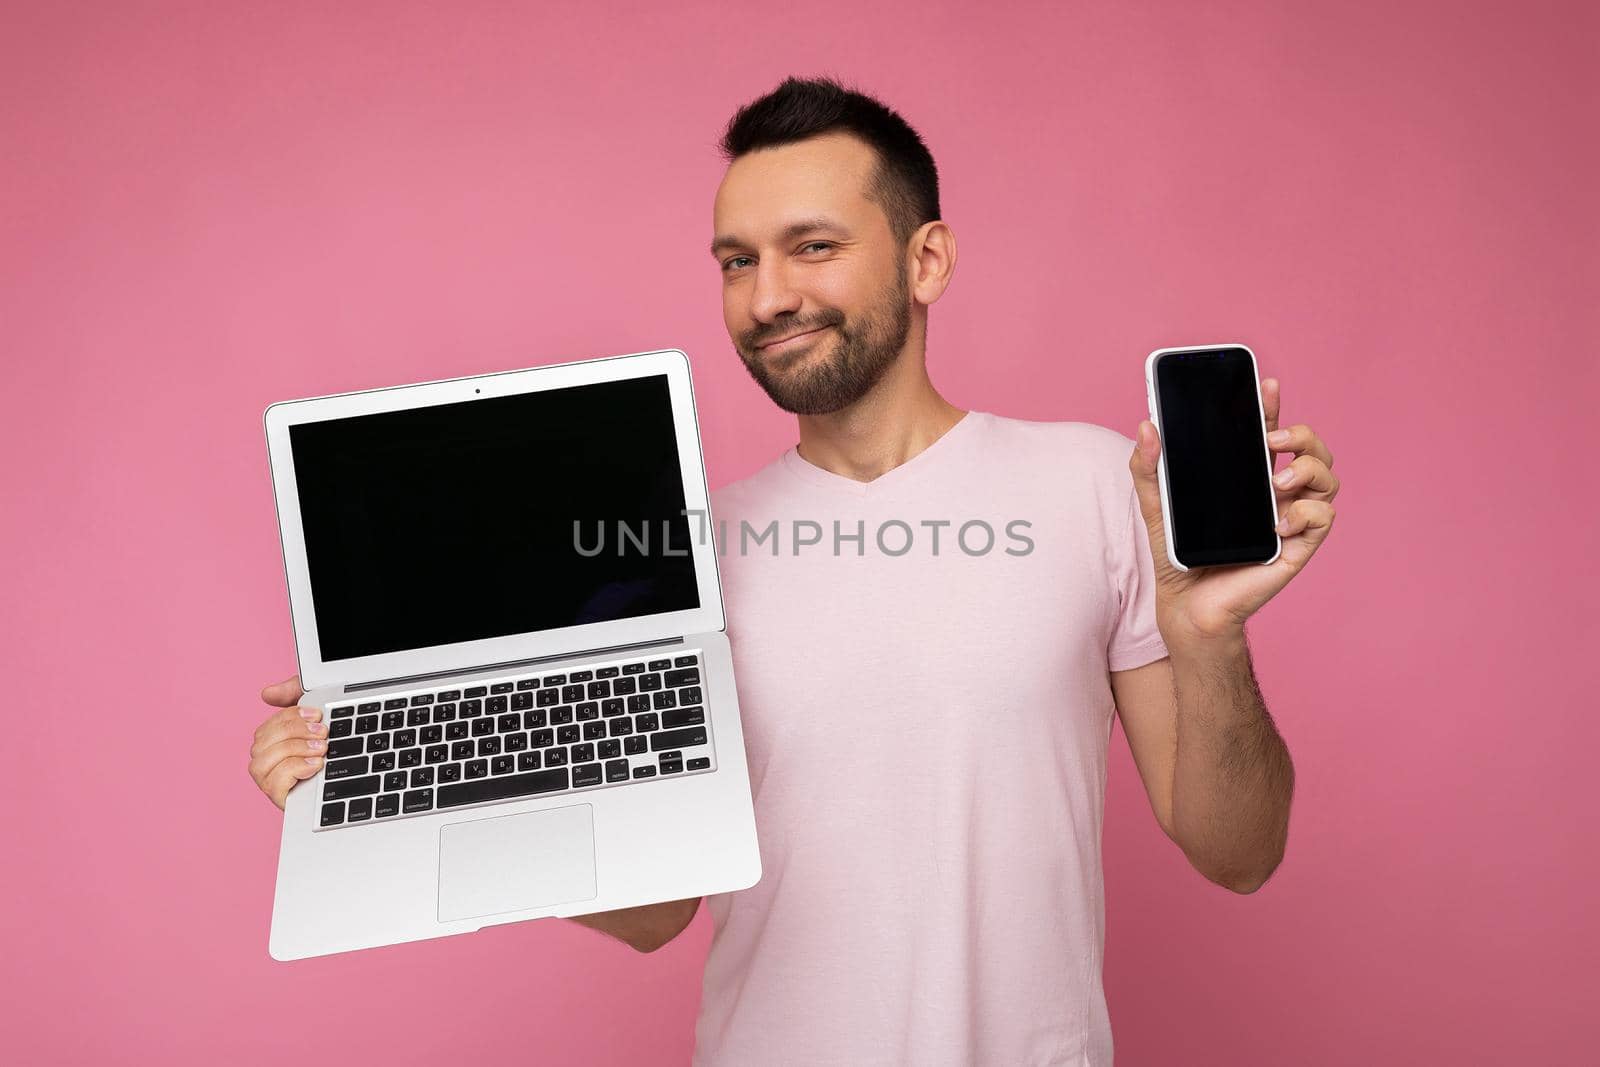 Handsome brunet man holding laptop computer and mobile phone looking at camera in t-shirt on isolated pink background.